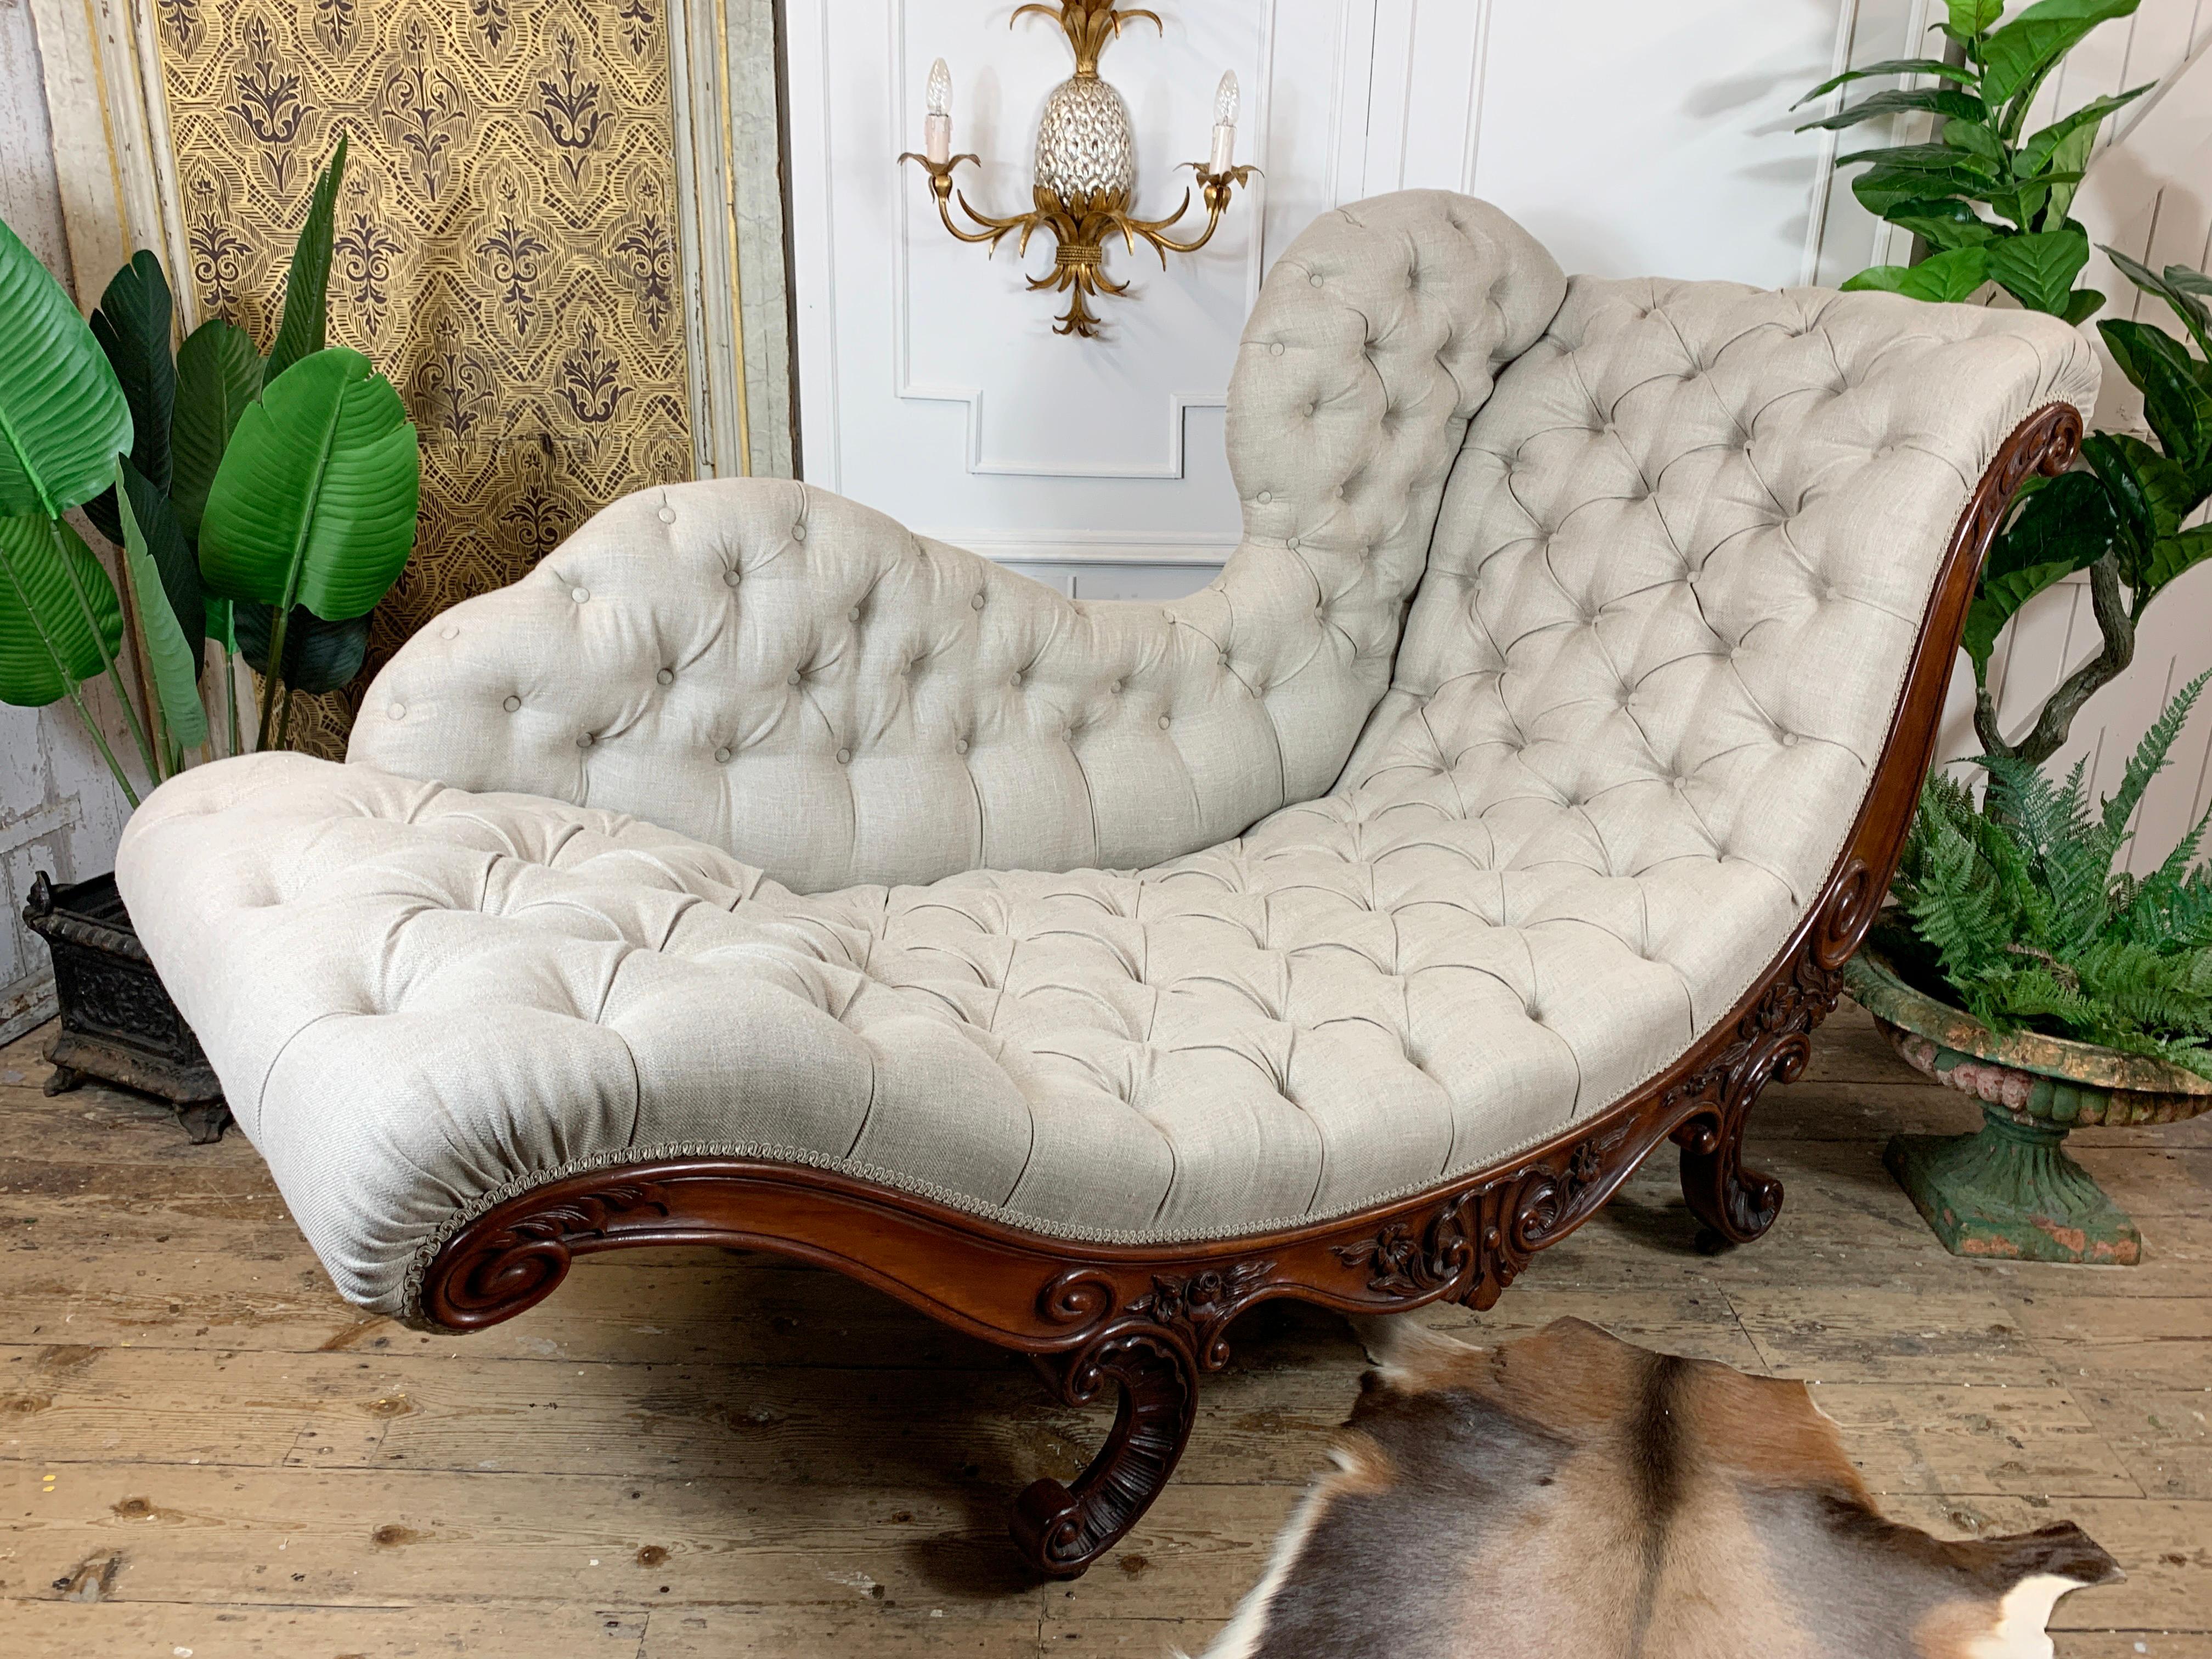 Rococo Revival John Henry Belter Meridienne/Recamier In Good Condition For Sale In Hastings, GB